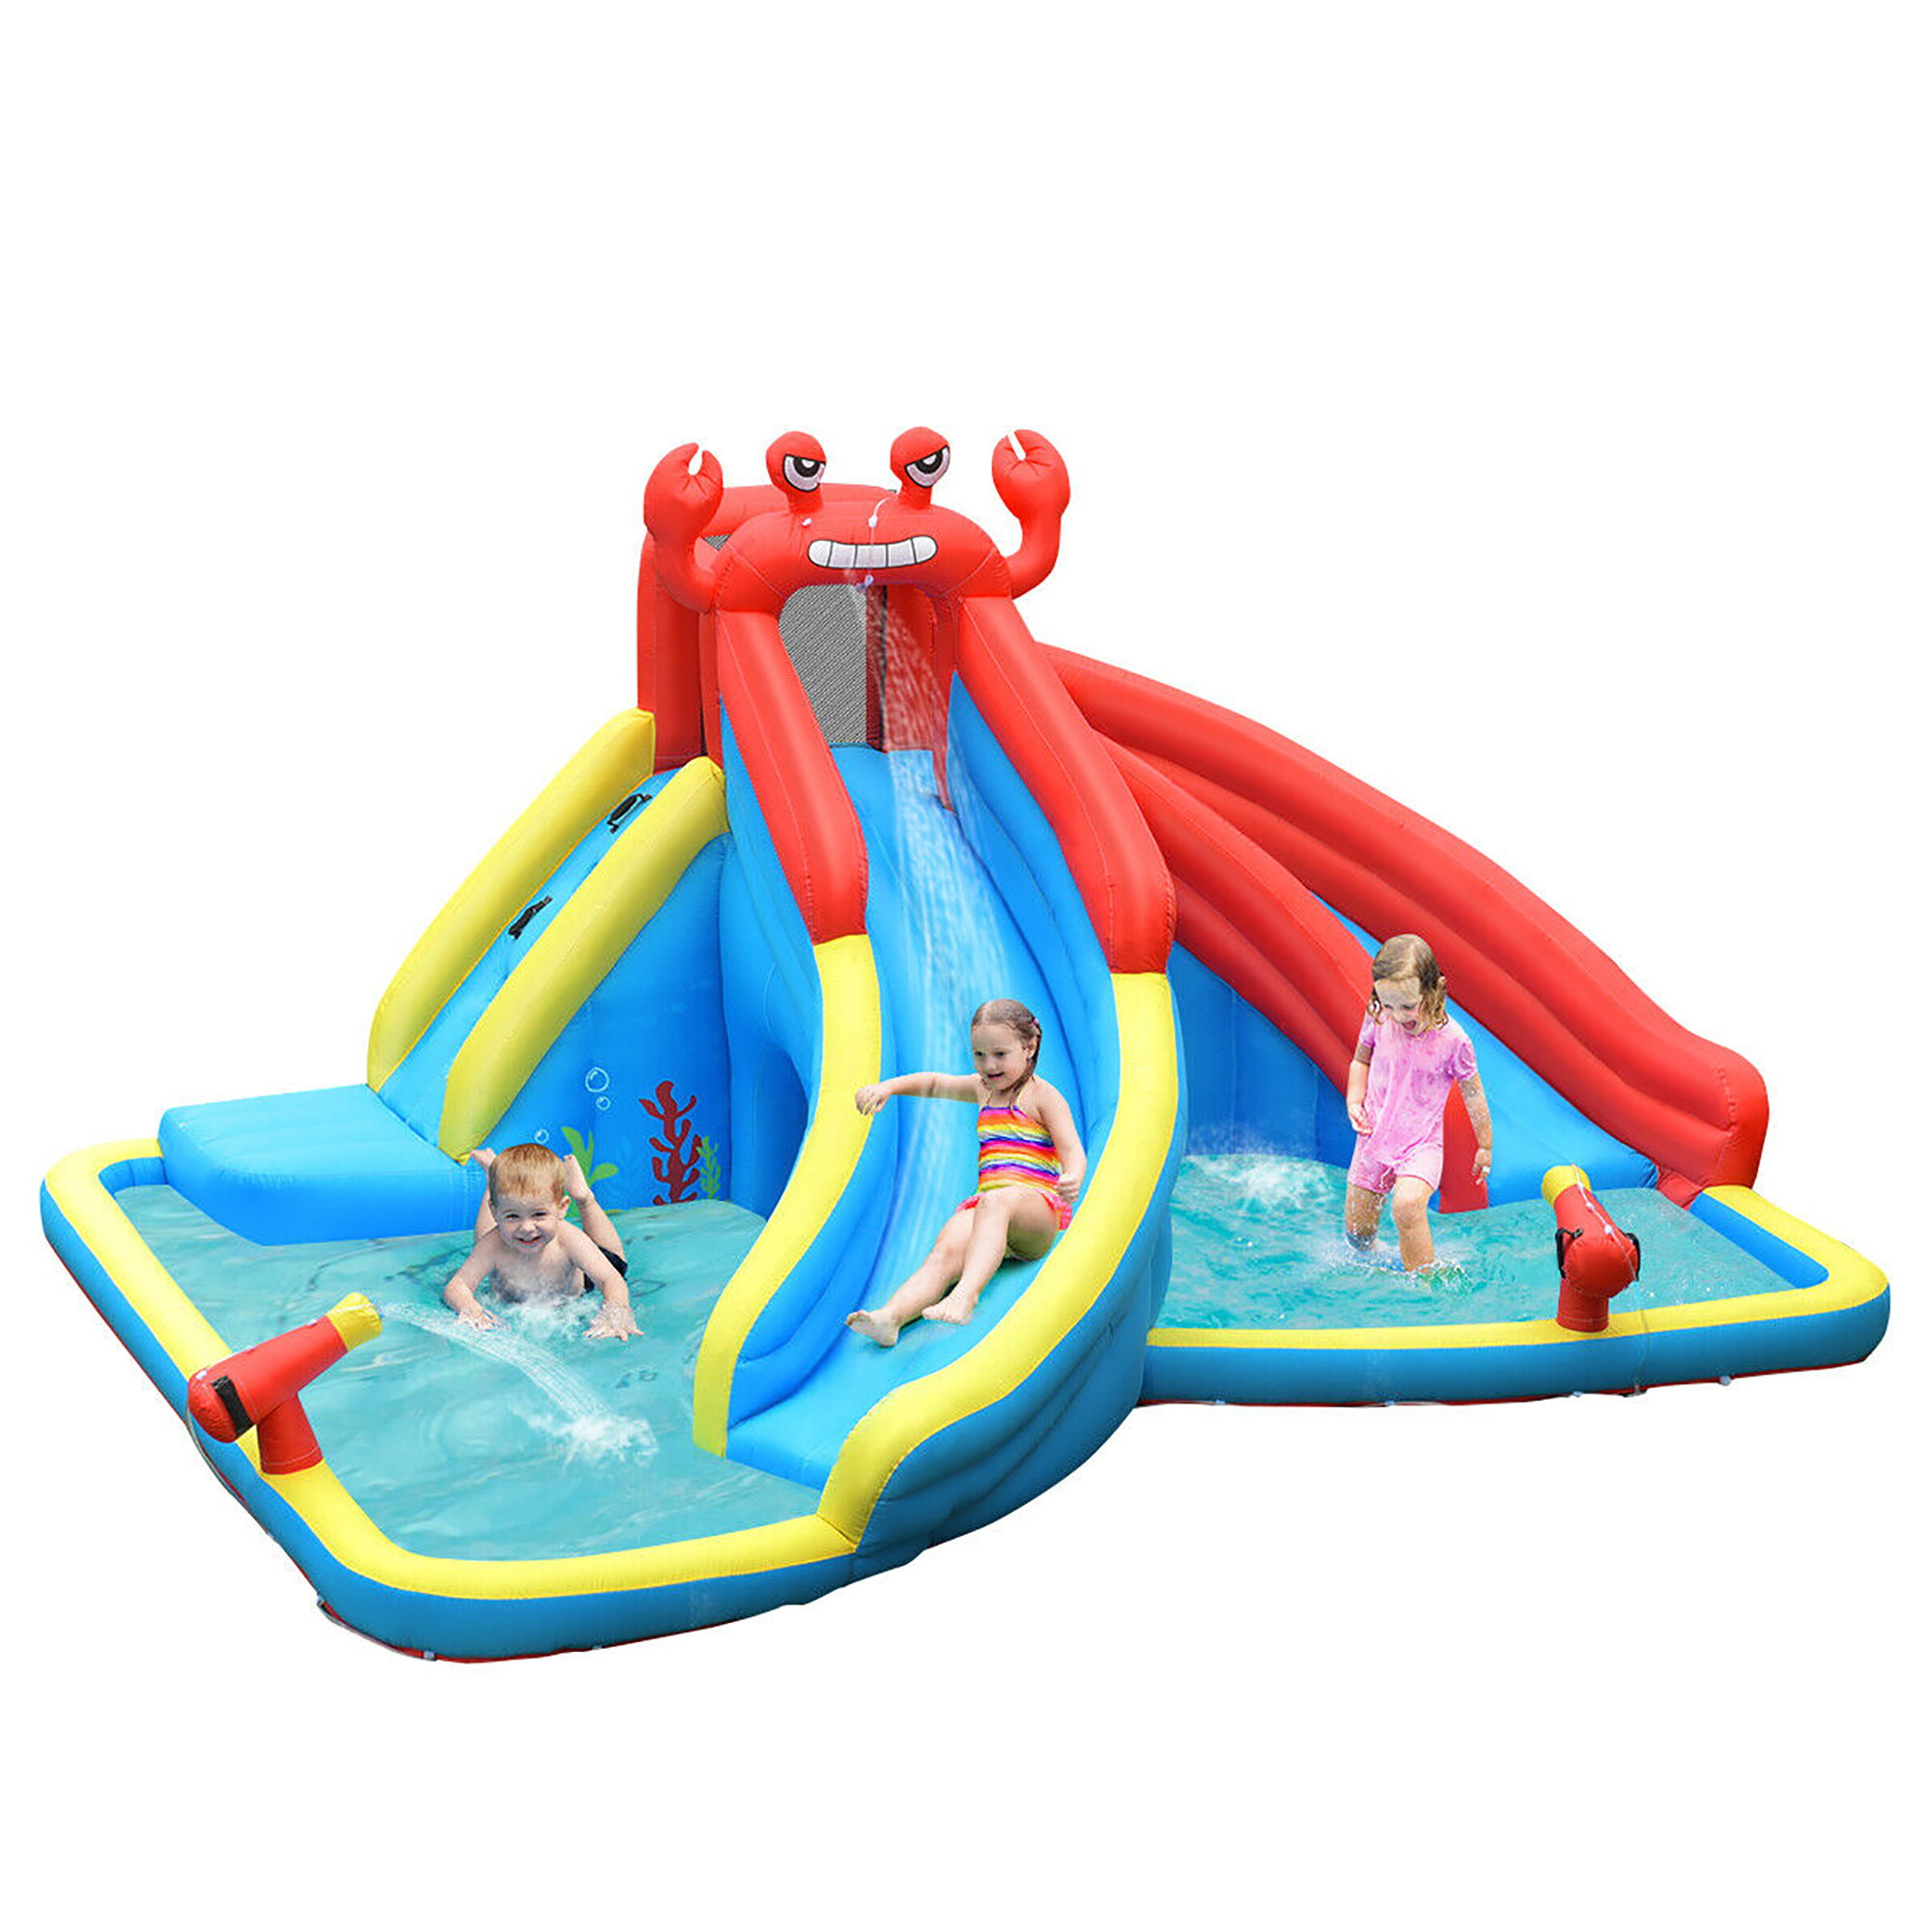 Costway Inflatable Water Slide Crab Dual Slide Bounce House Splash Pool Without Blower - image 1 of 10